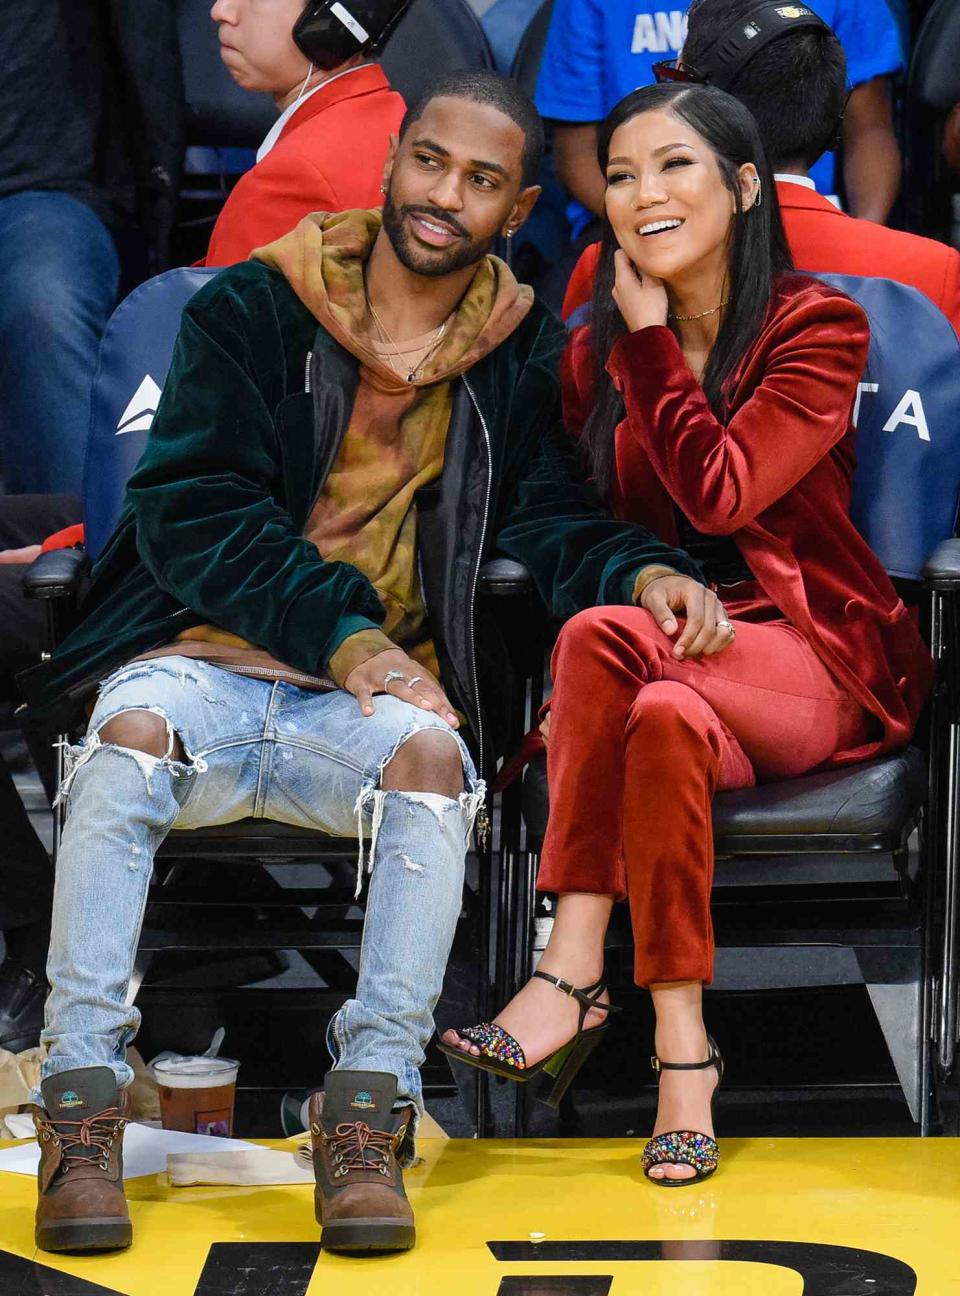 Big Sean (L) and Jhene Aiko attend a basketball game between Utah Jazz and the Los Angeles Lakers at Staples Center on December 5, 2016 in Los Angeles, California